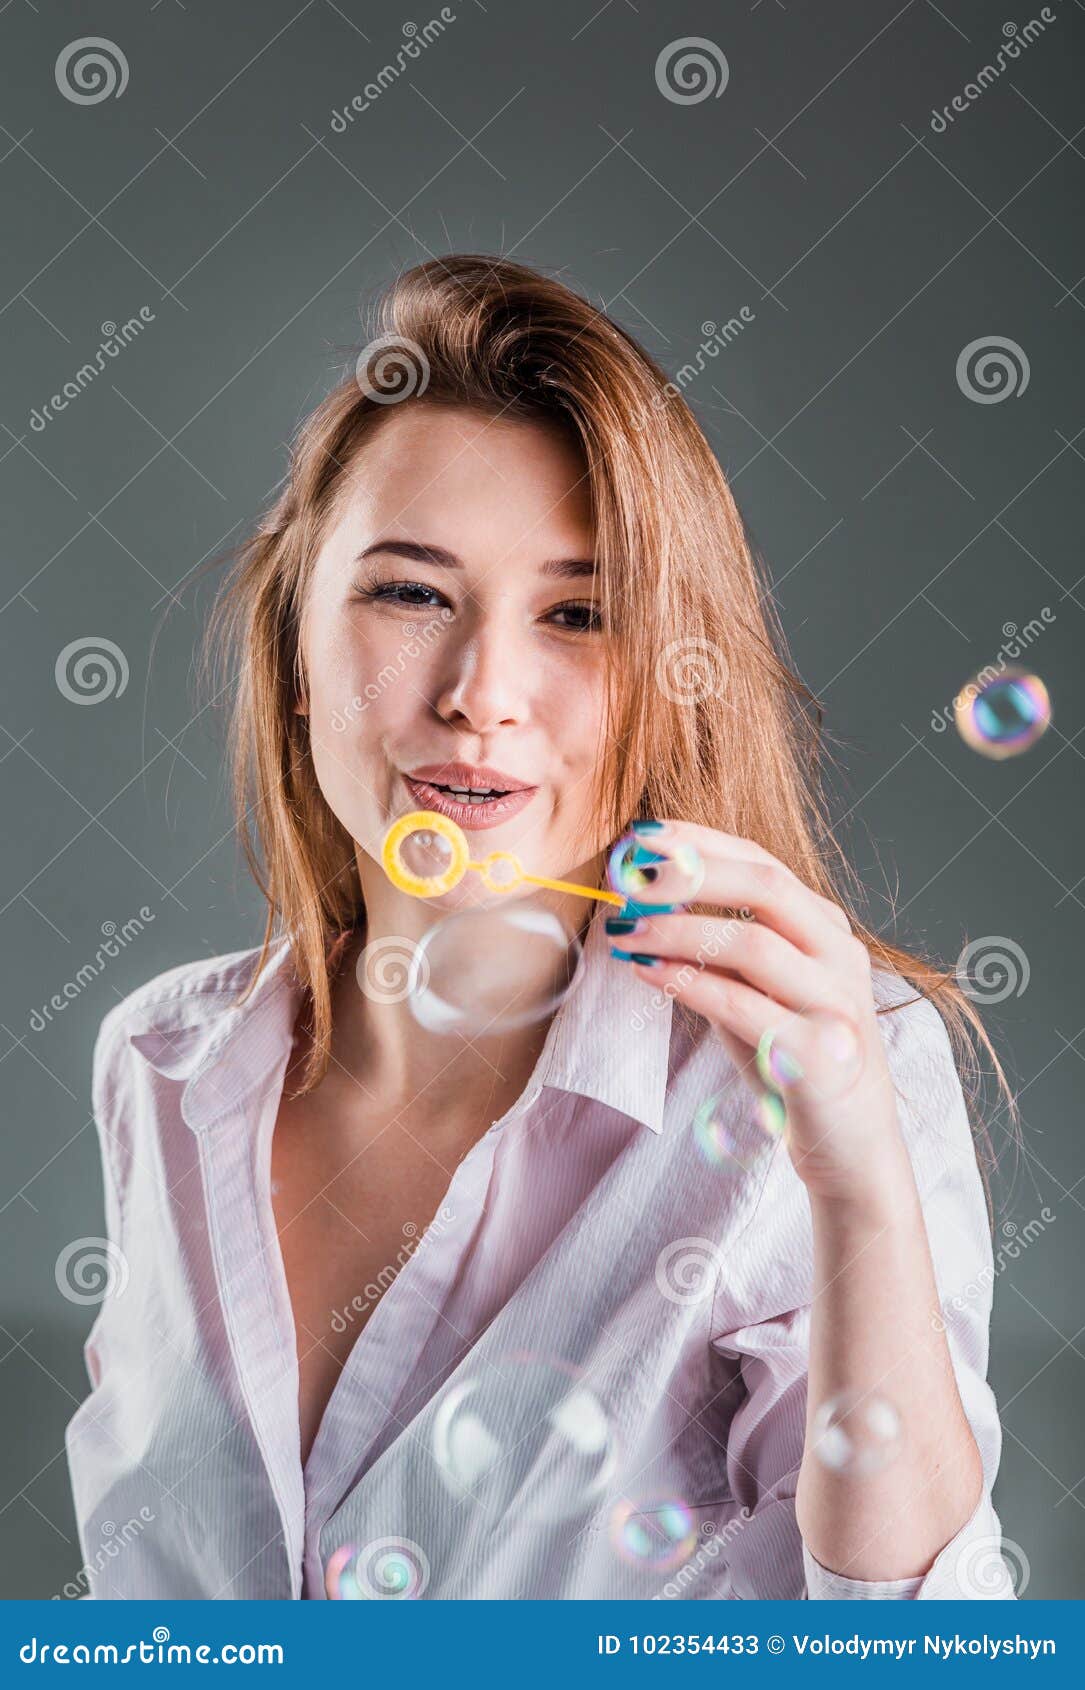 Girl Playing With Soap Bubbles S